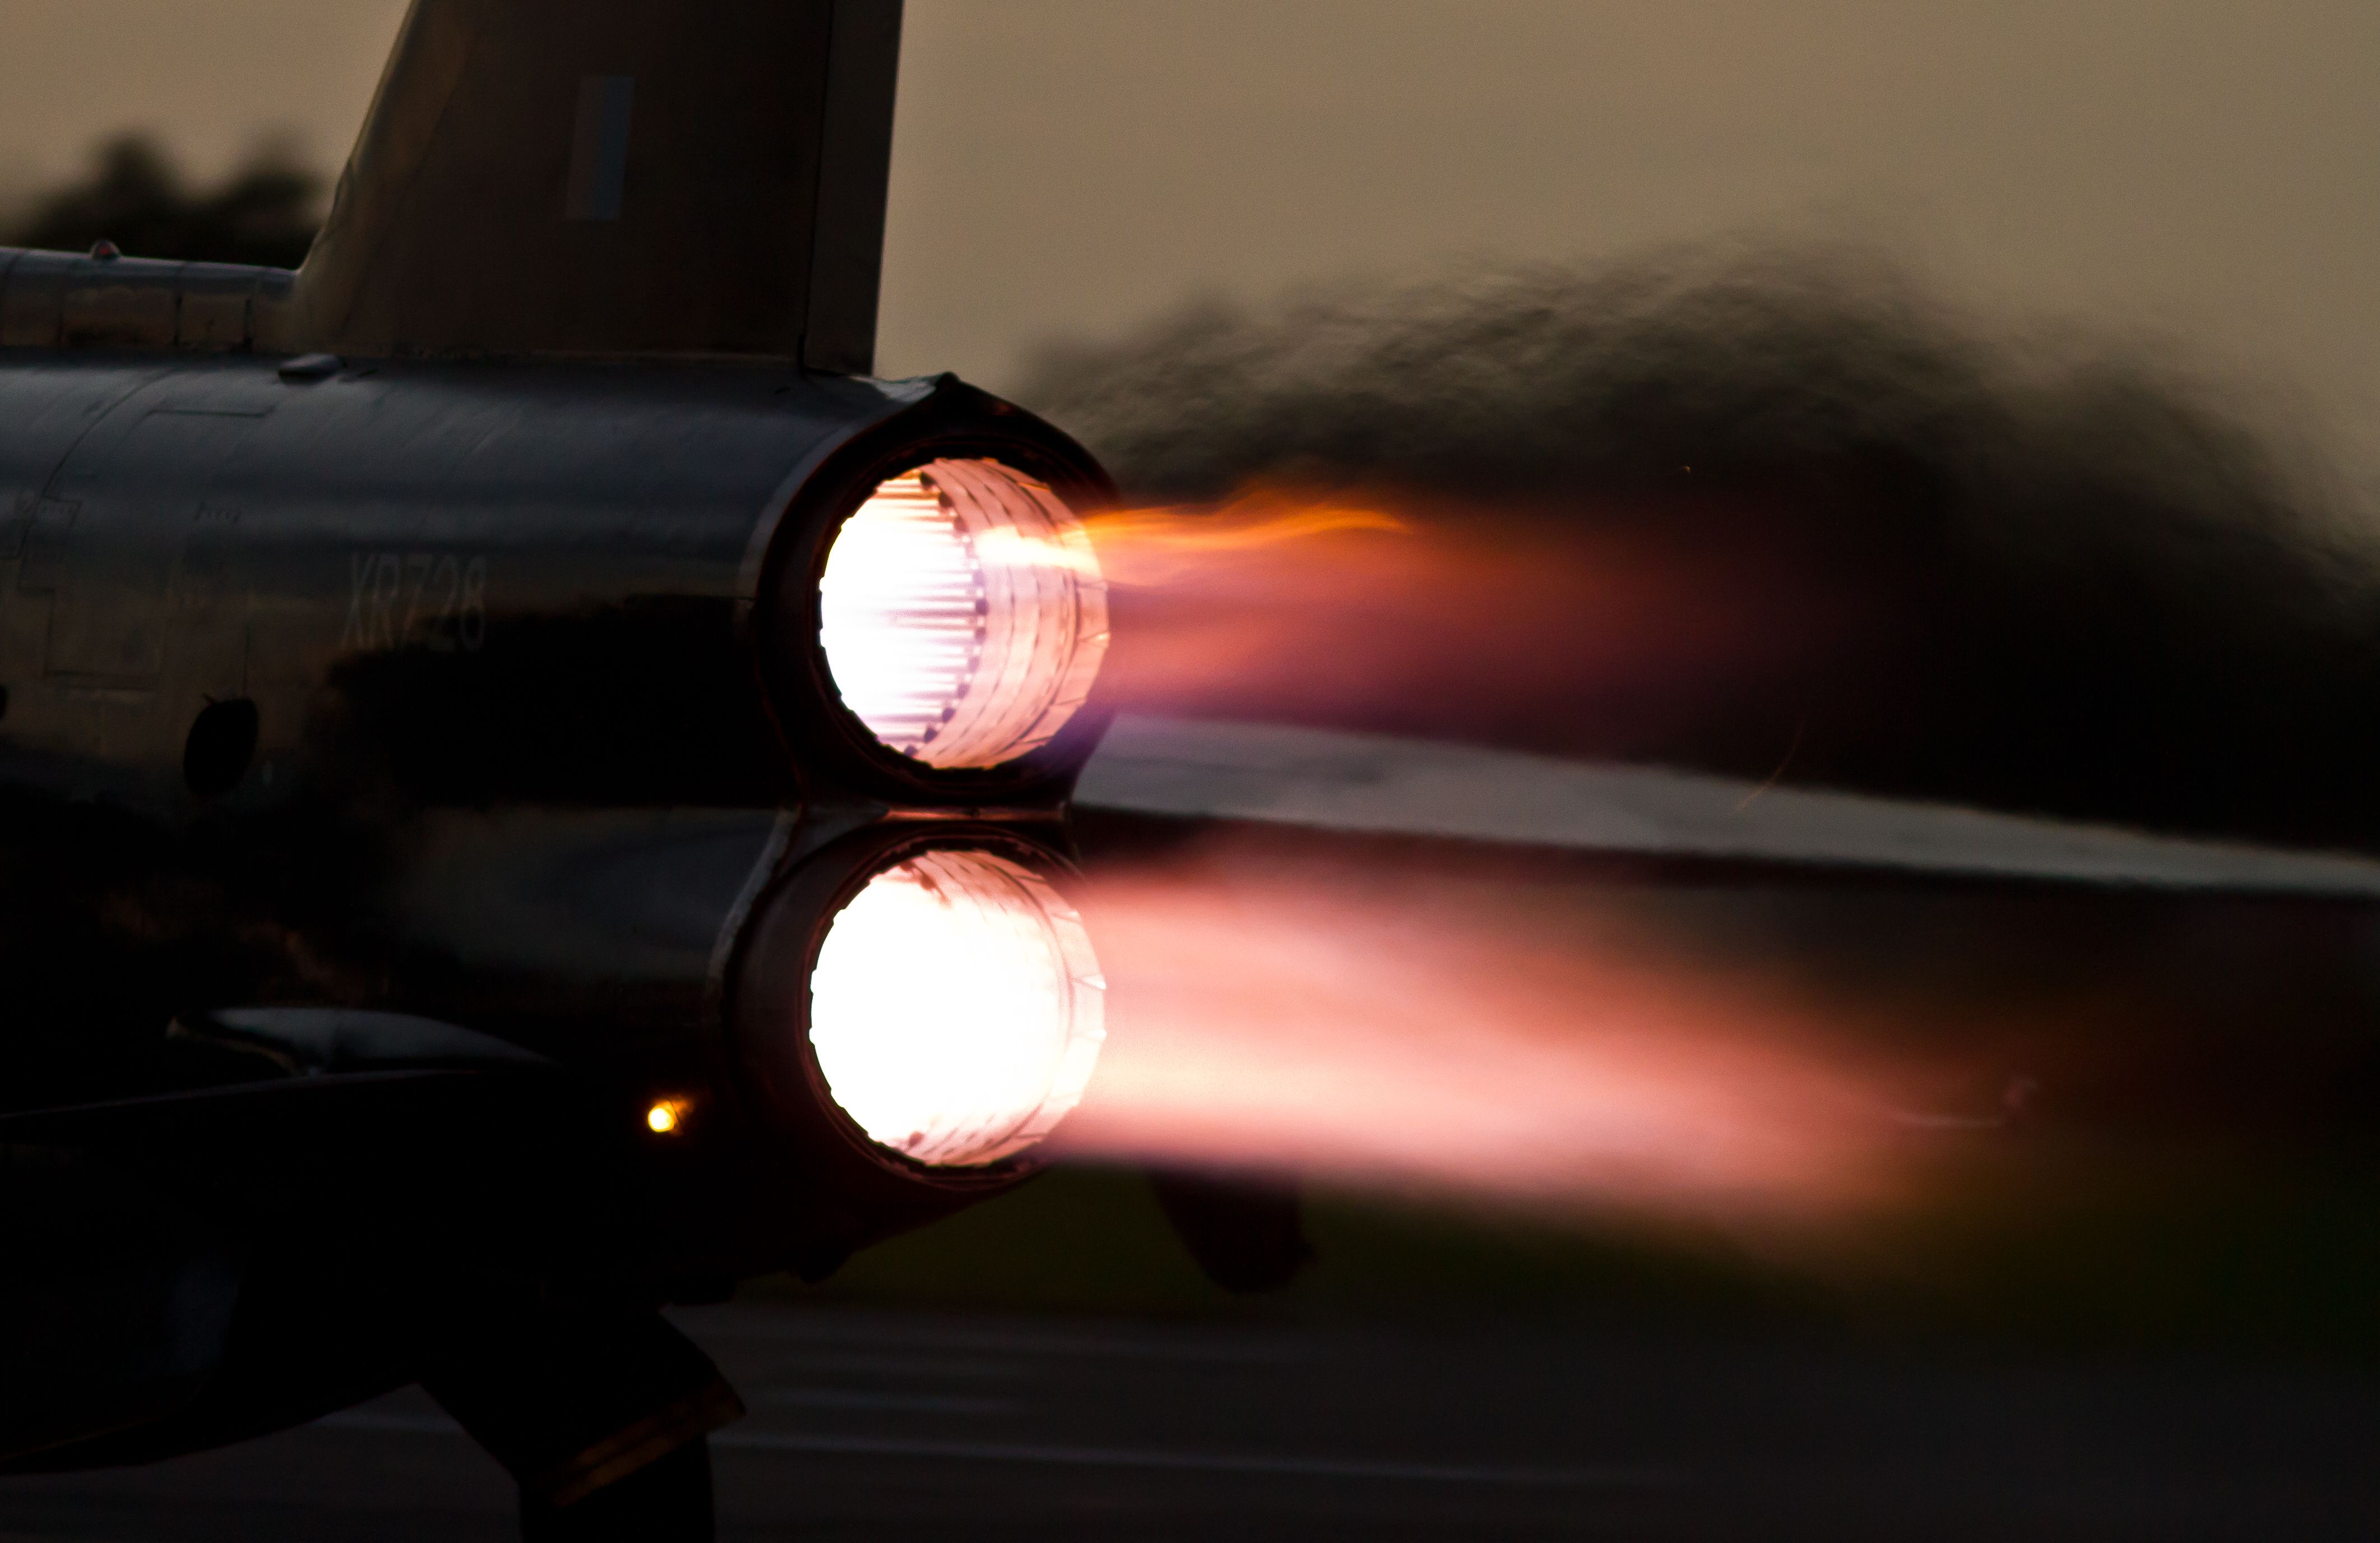 Wallpaper, reflection, sky, war, airplane, aircraft, lightning, cold, propeller, Run, electric, afterburner, engine, Twilight, F aviation, jet, english, atmosphere of earth, air travel, aerospace engineering, js, bruntingthorpe, xr728 4246x2752